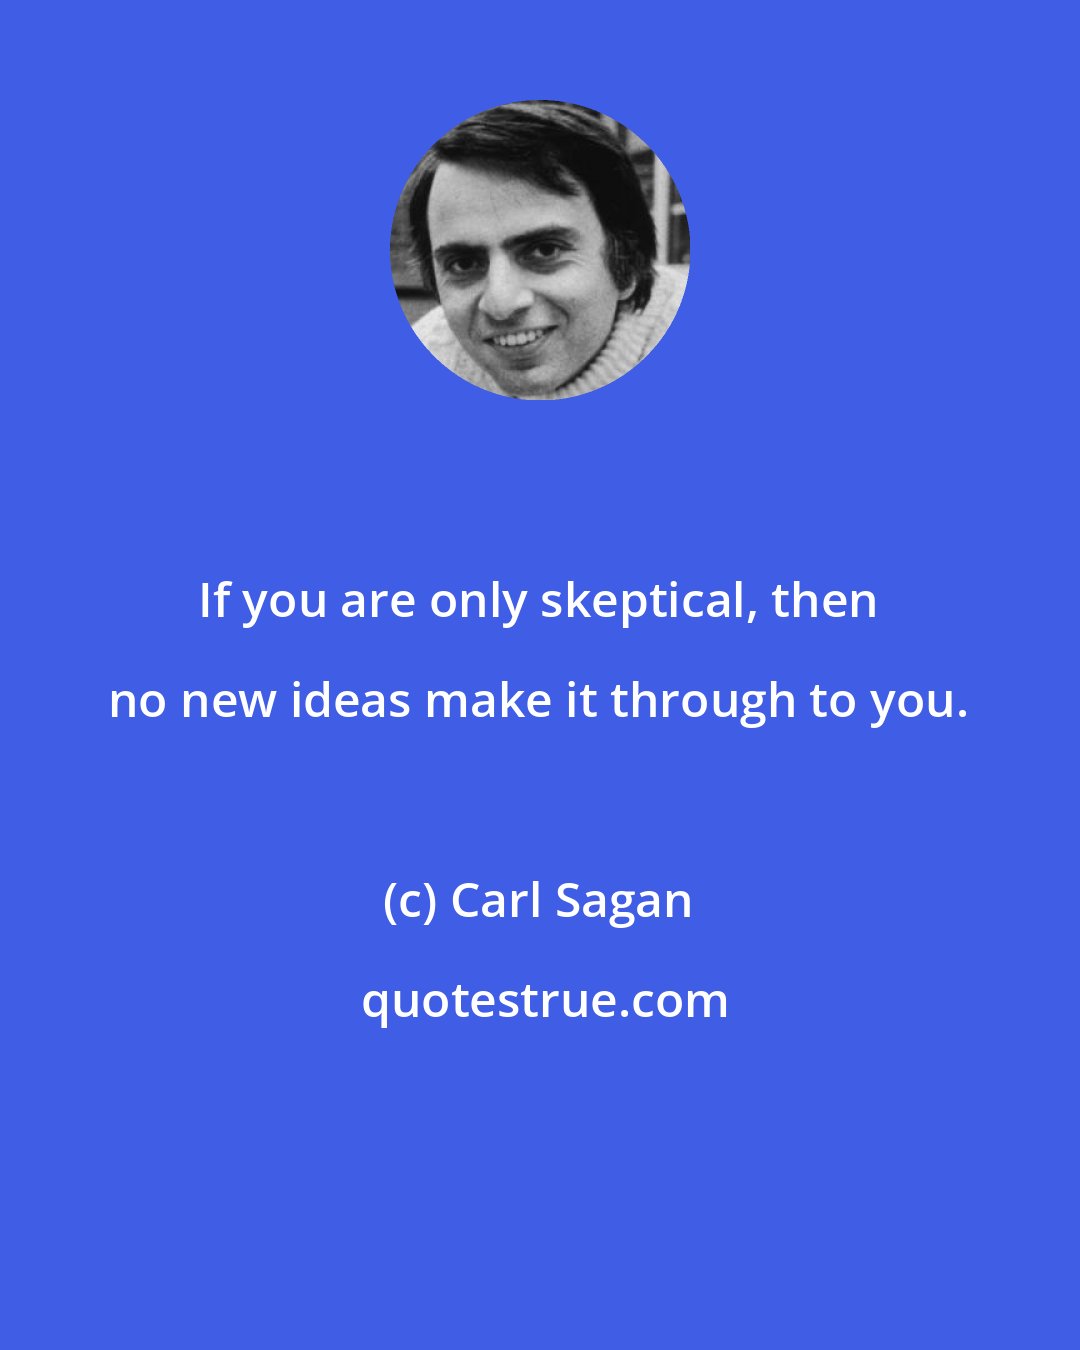 Carl Sagan: If you are only skeptical, then no new ideas make it through to you.